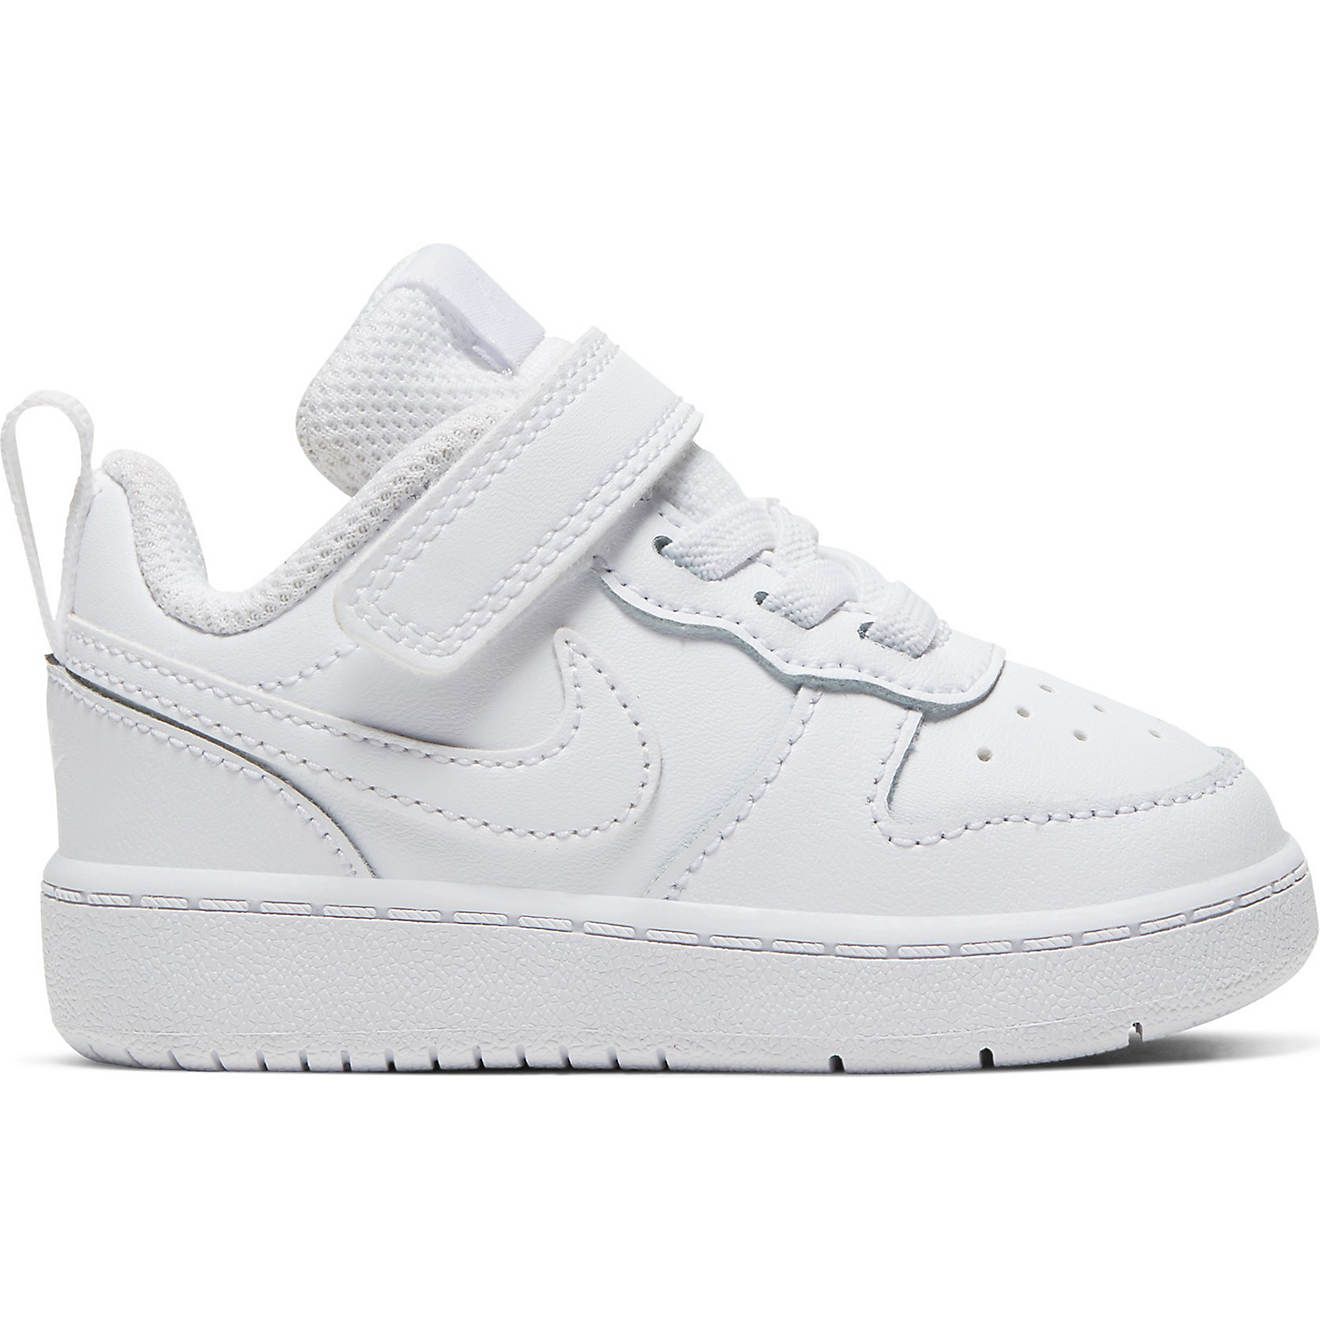 Nike Toddler Boys' Court Borough Low 2 Shoes | Academy Sports + Outdoors